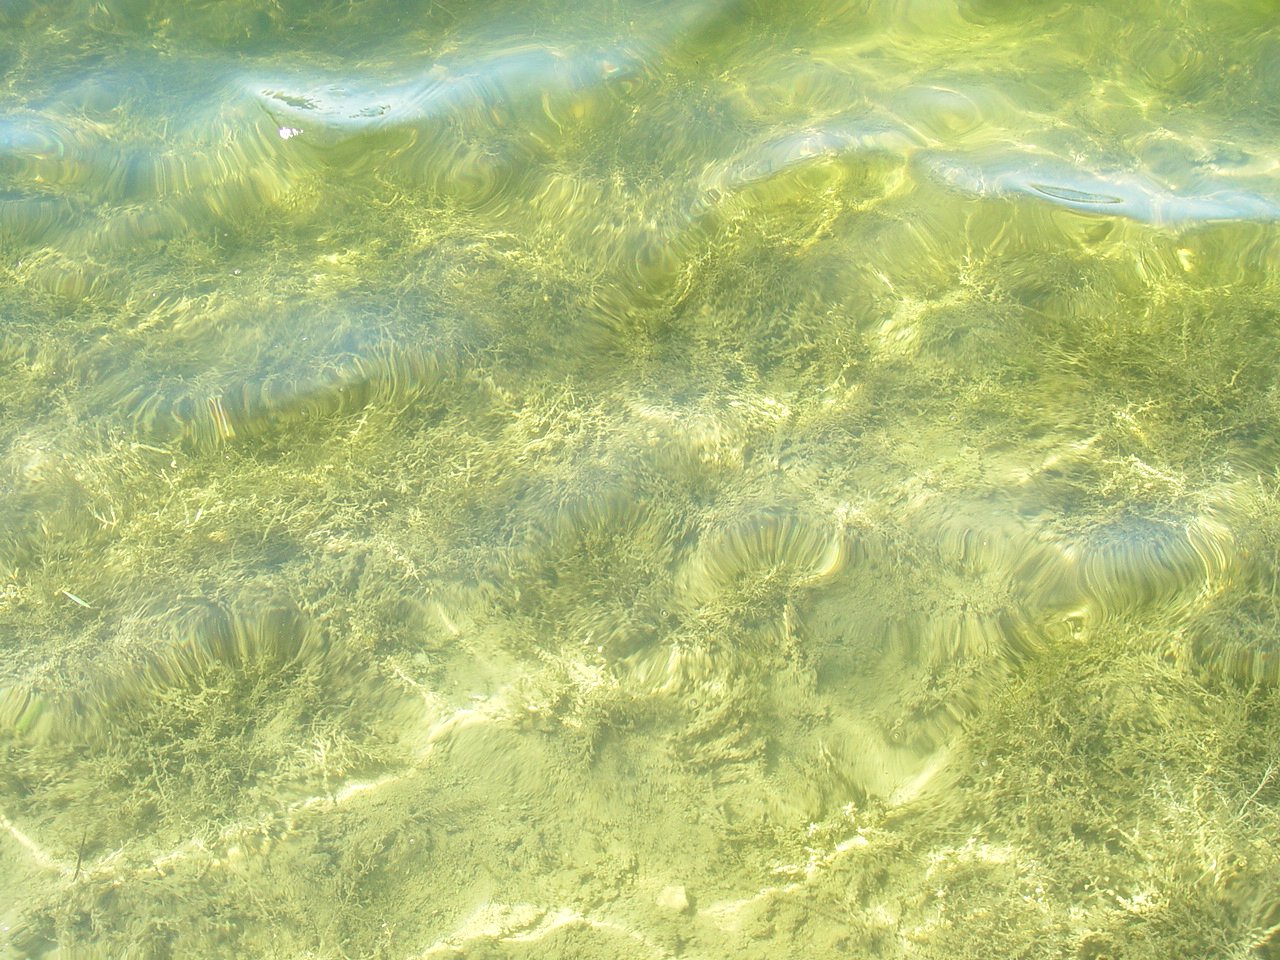 the water is green with brown algae and small white bubbles